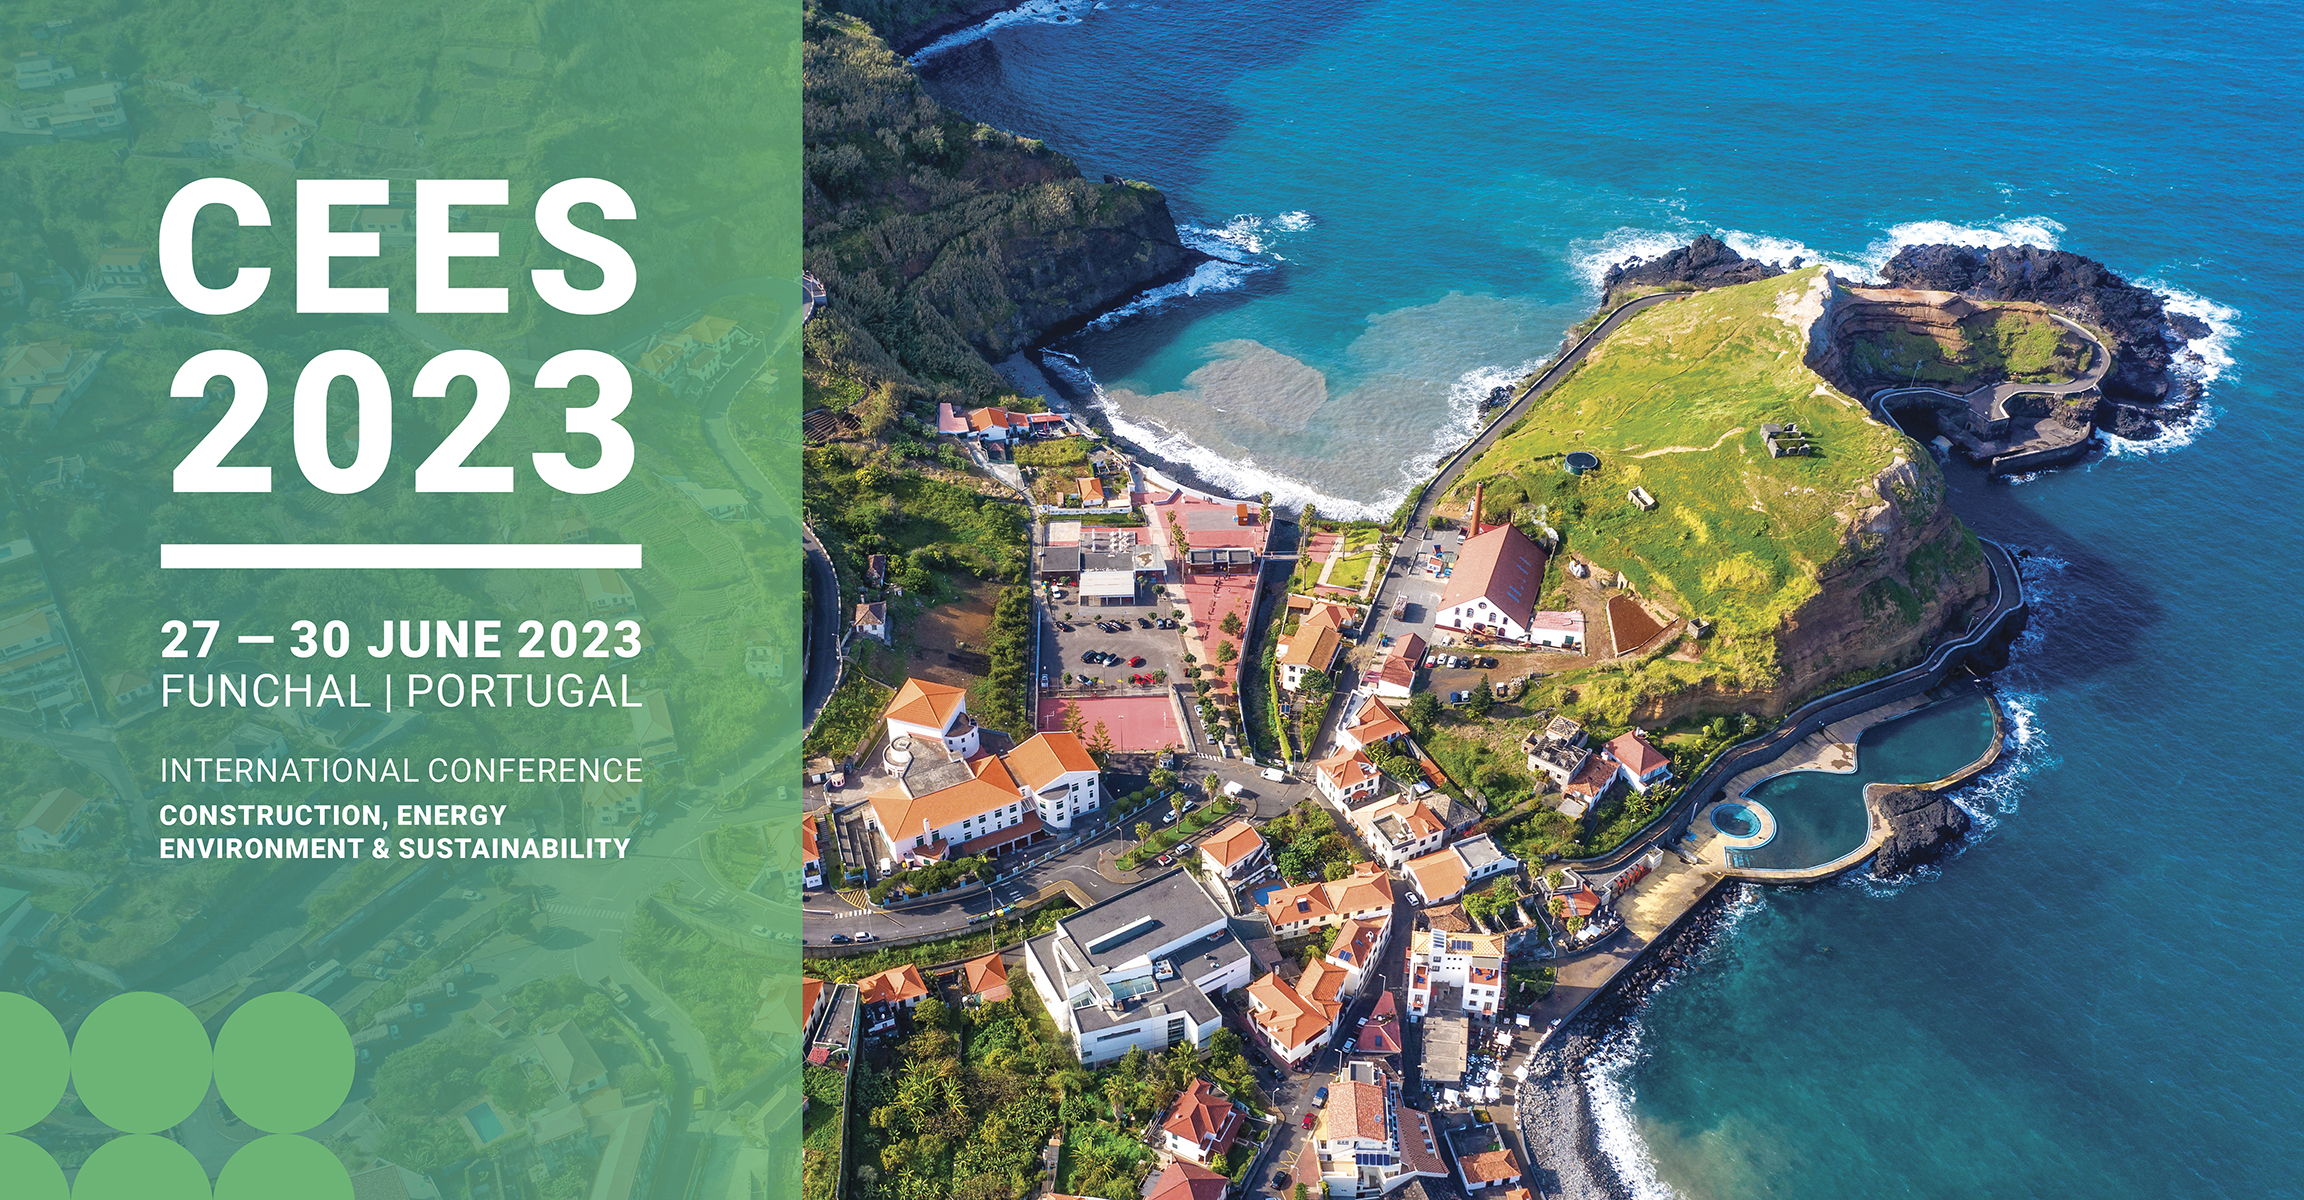 CEES 2023 – International Conference on Construction, Energy, Environment and Sustainability